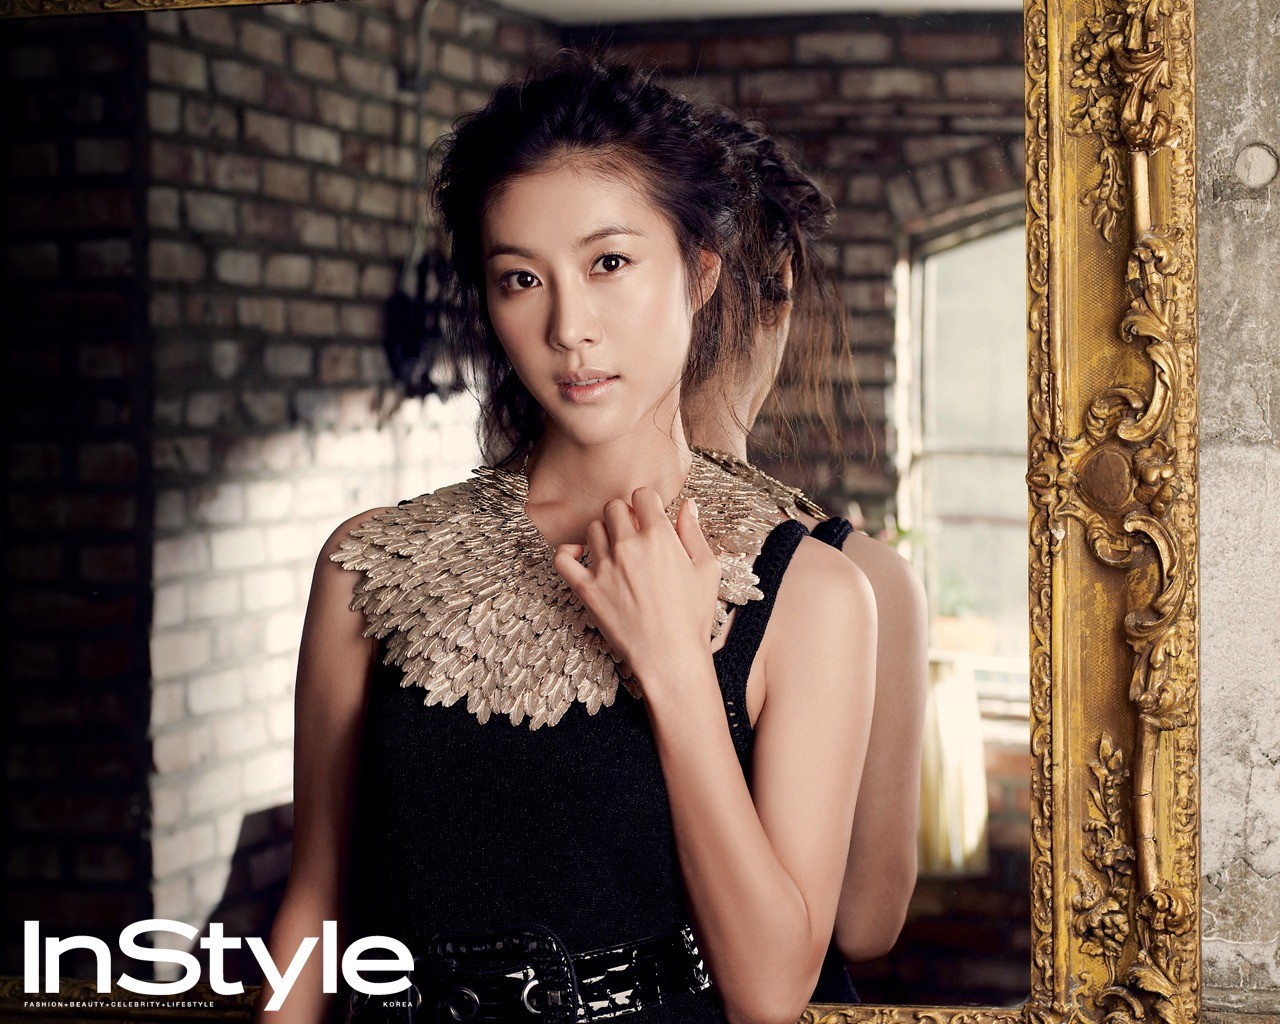 South Korea Instyle Cover Model #31 - 1280x1024